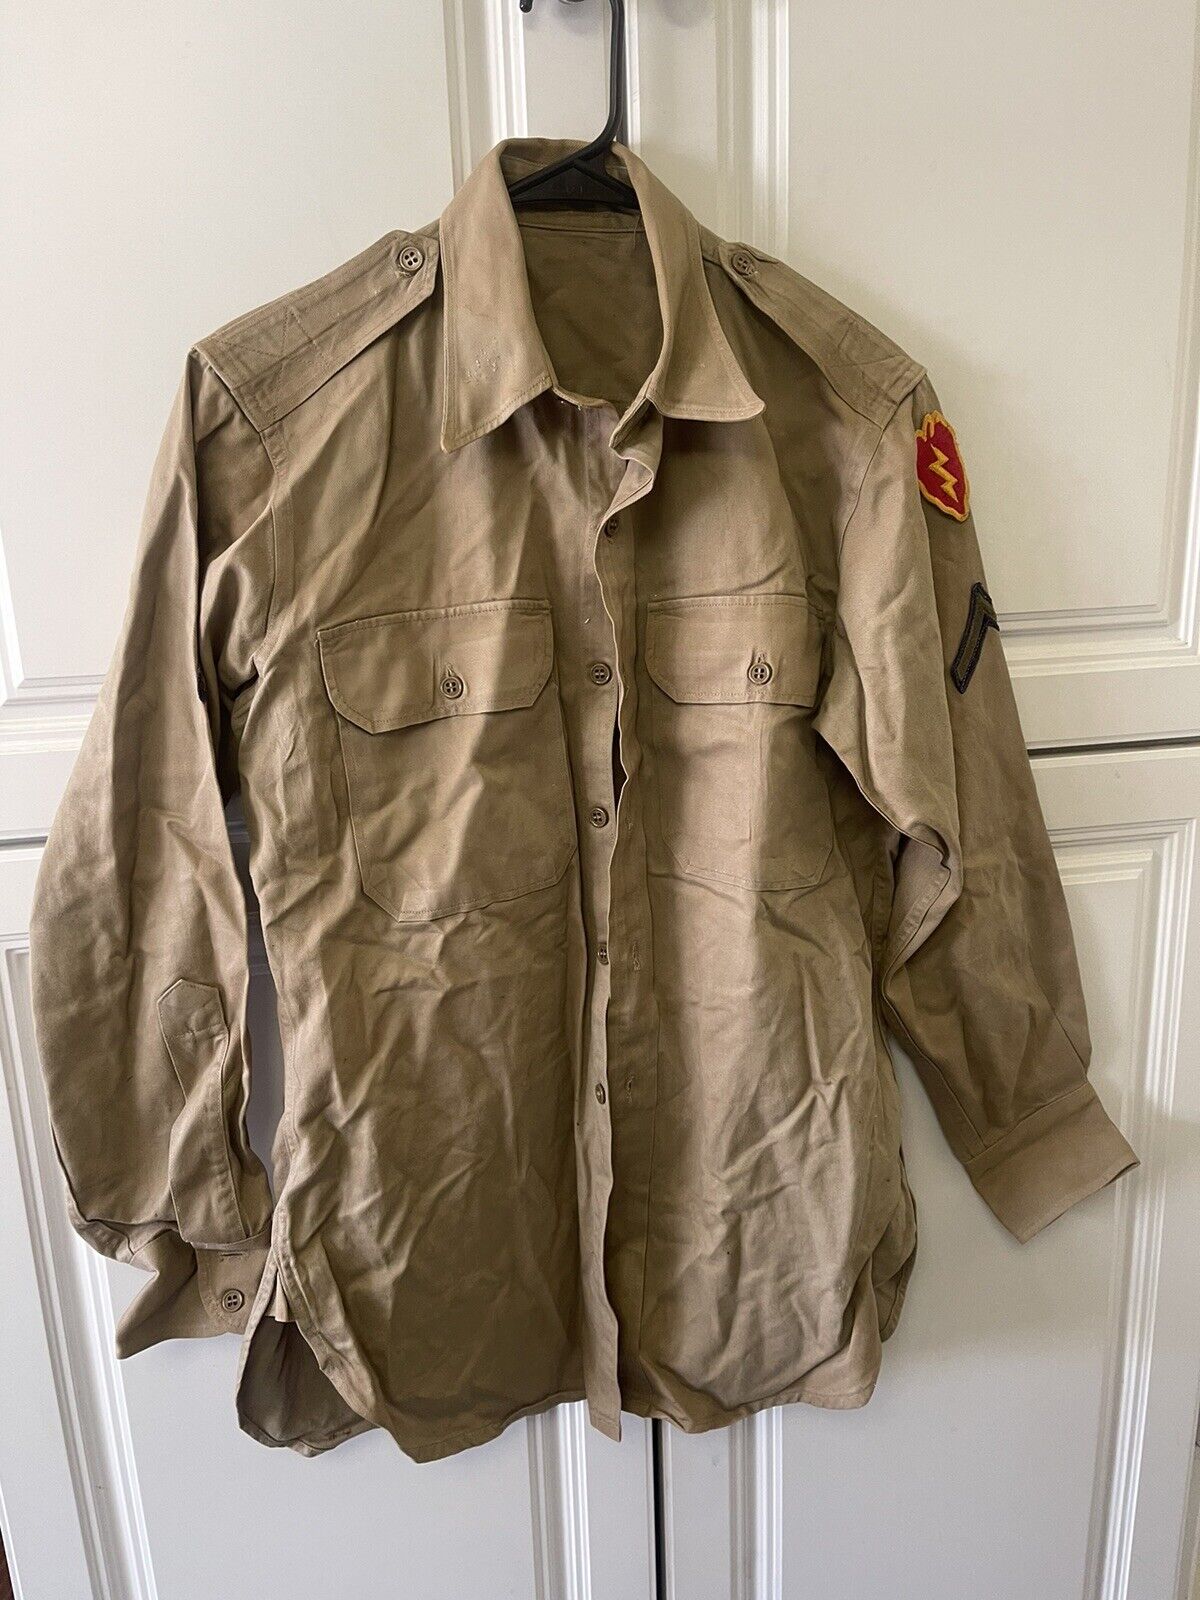 WWII Khaki Cotton Twill Shirt With Original Patches 